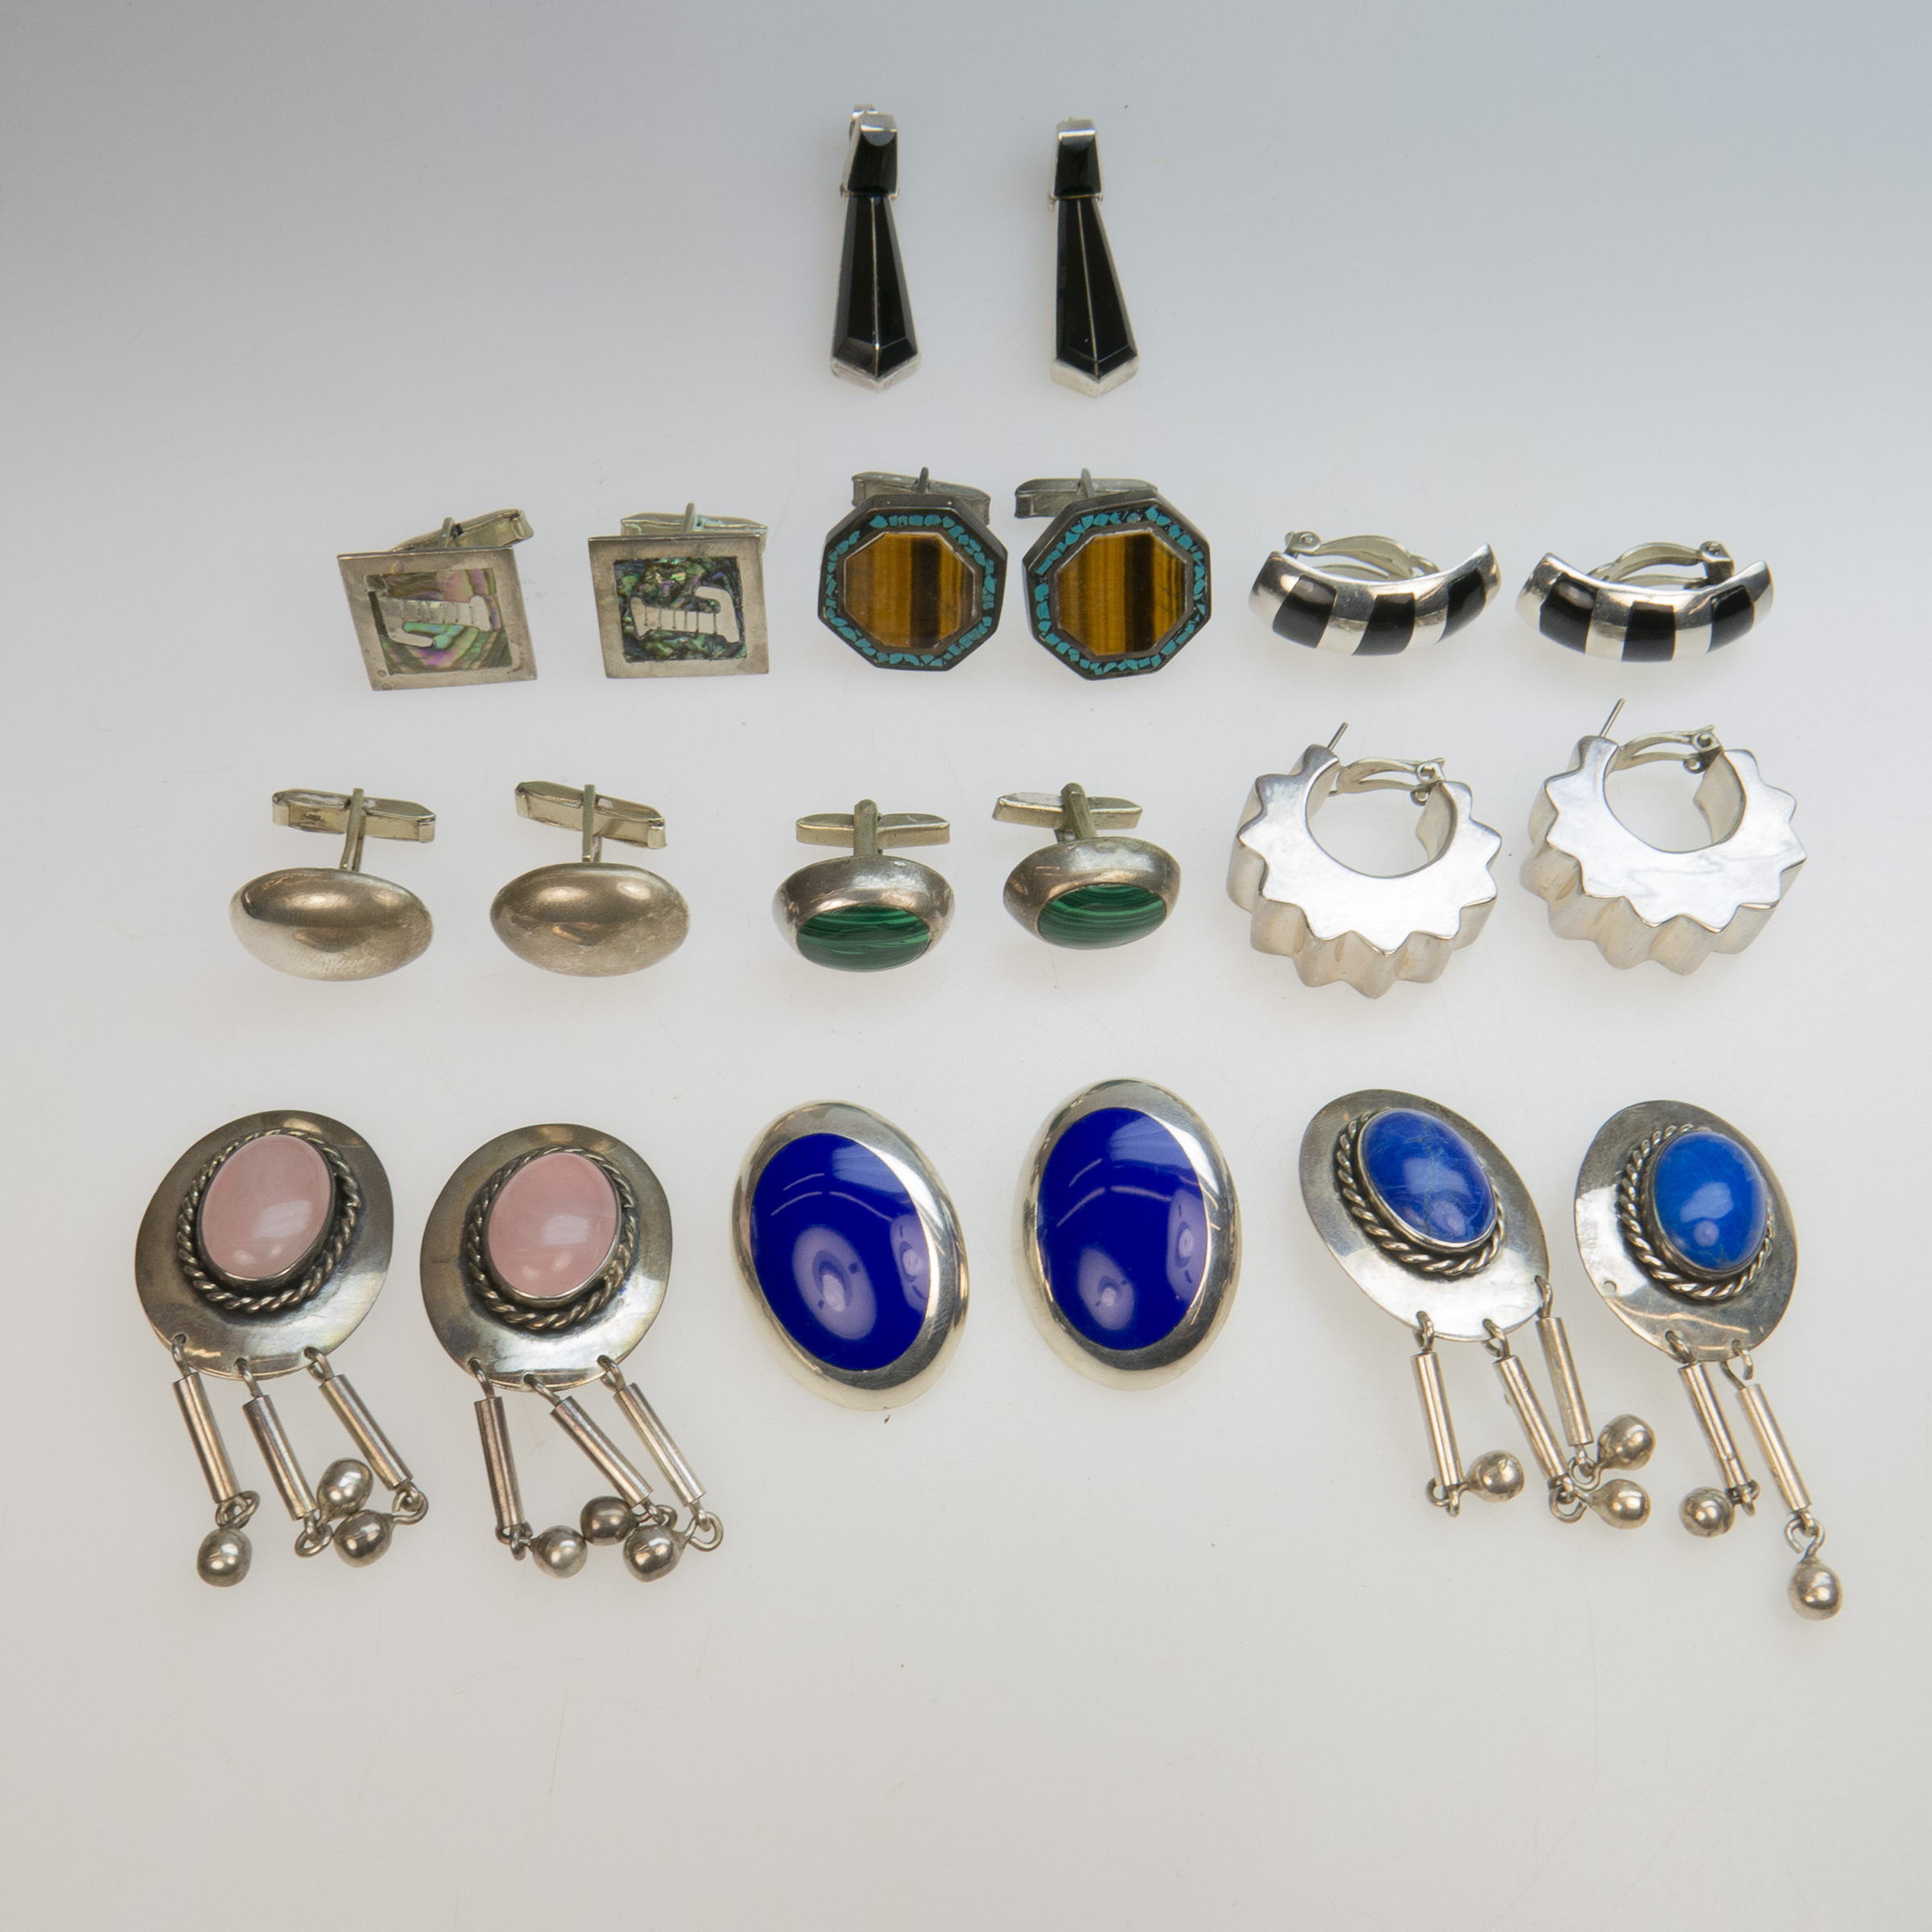 Quantity of Mexican Sterling Silver Earrings And Cufflinks